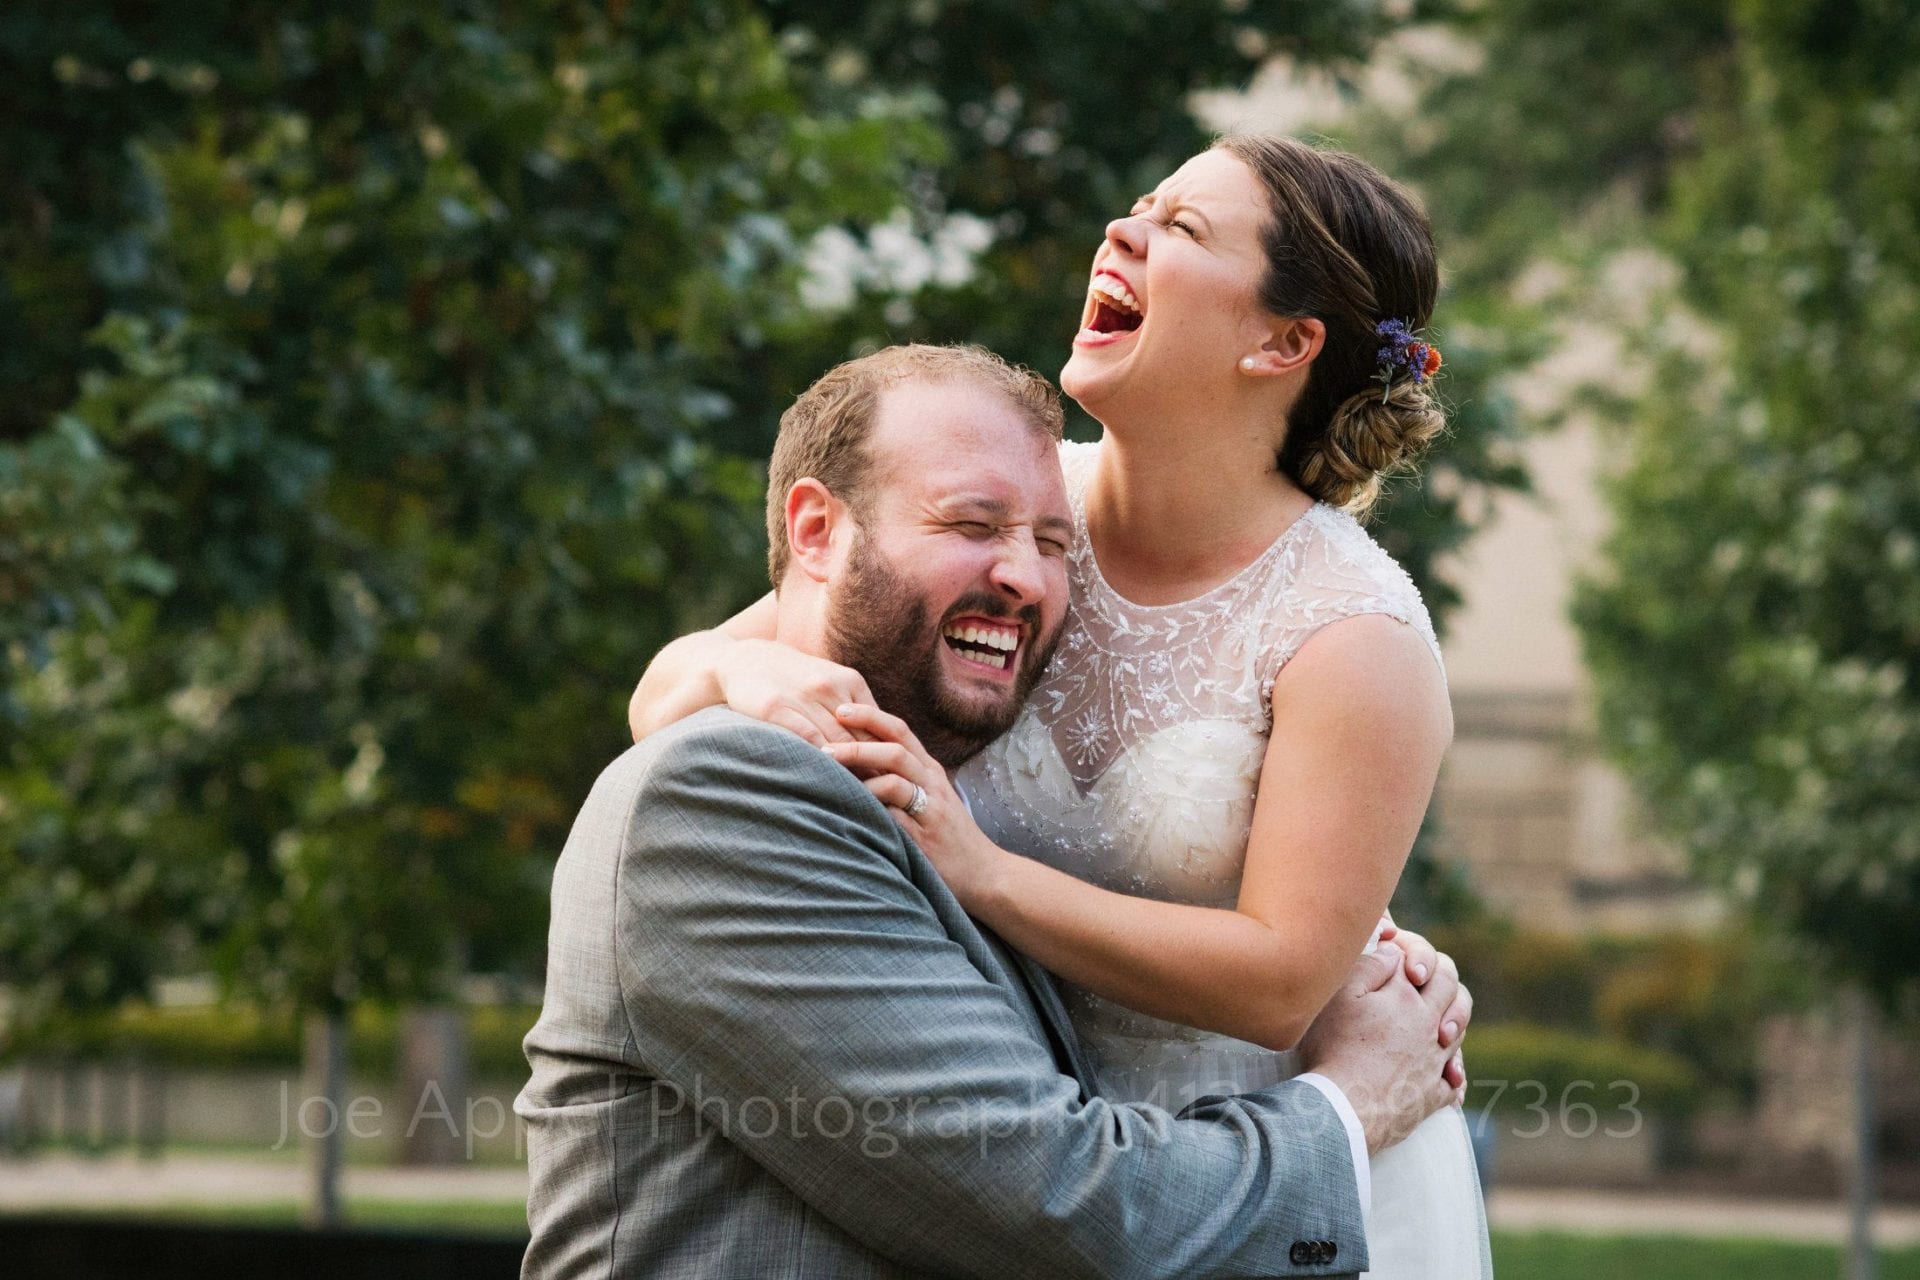 A young bride and groom hold on to one another in a wooded setting and laugh.